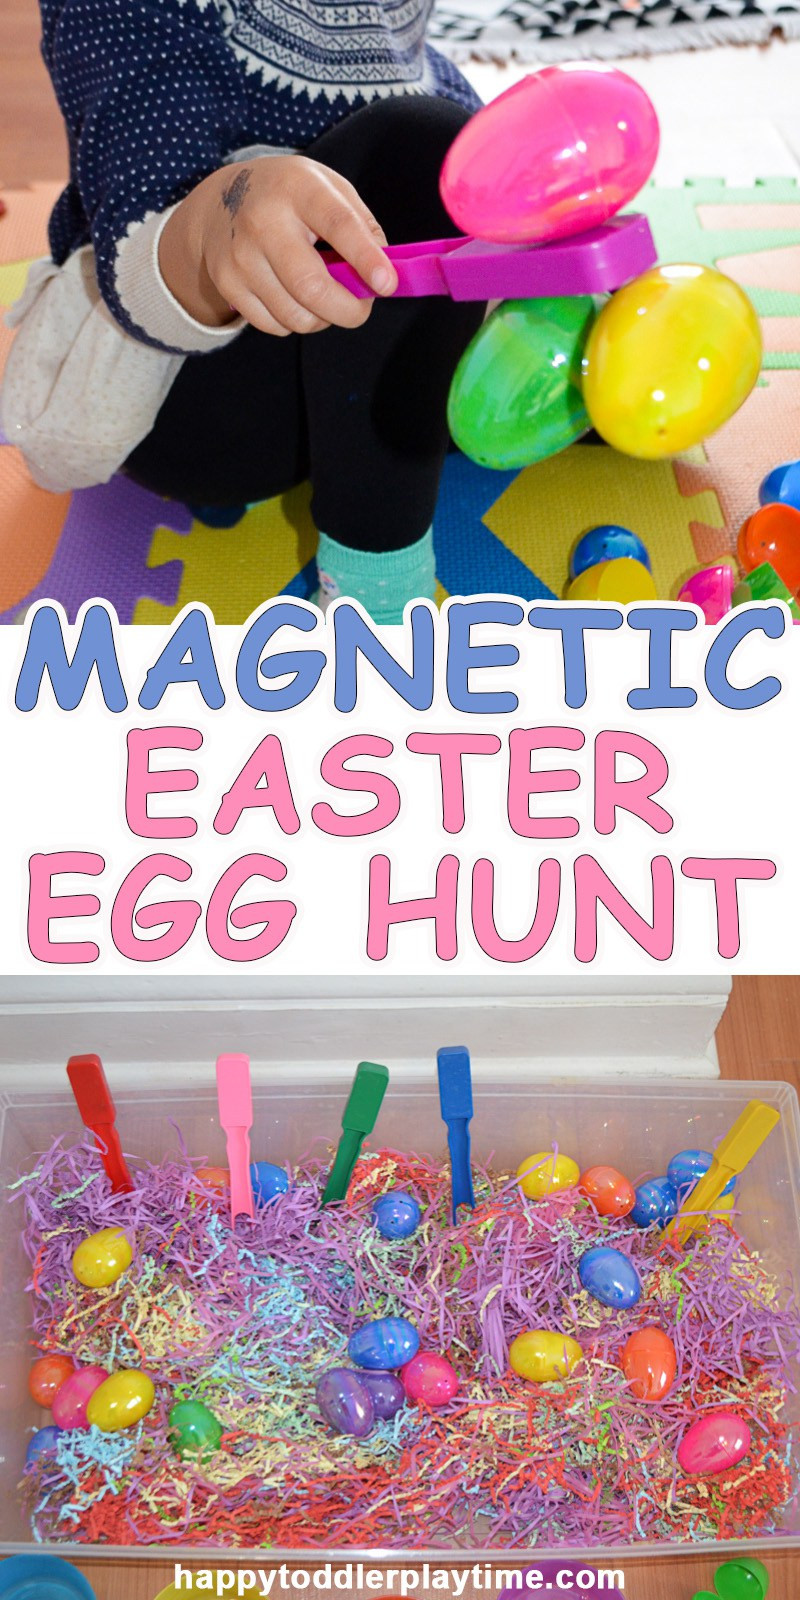 Unique Easter Egg Hunt Ideas
 Creative Easter Egg Hunt Ideas That Will Keep Kids Hopping